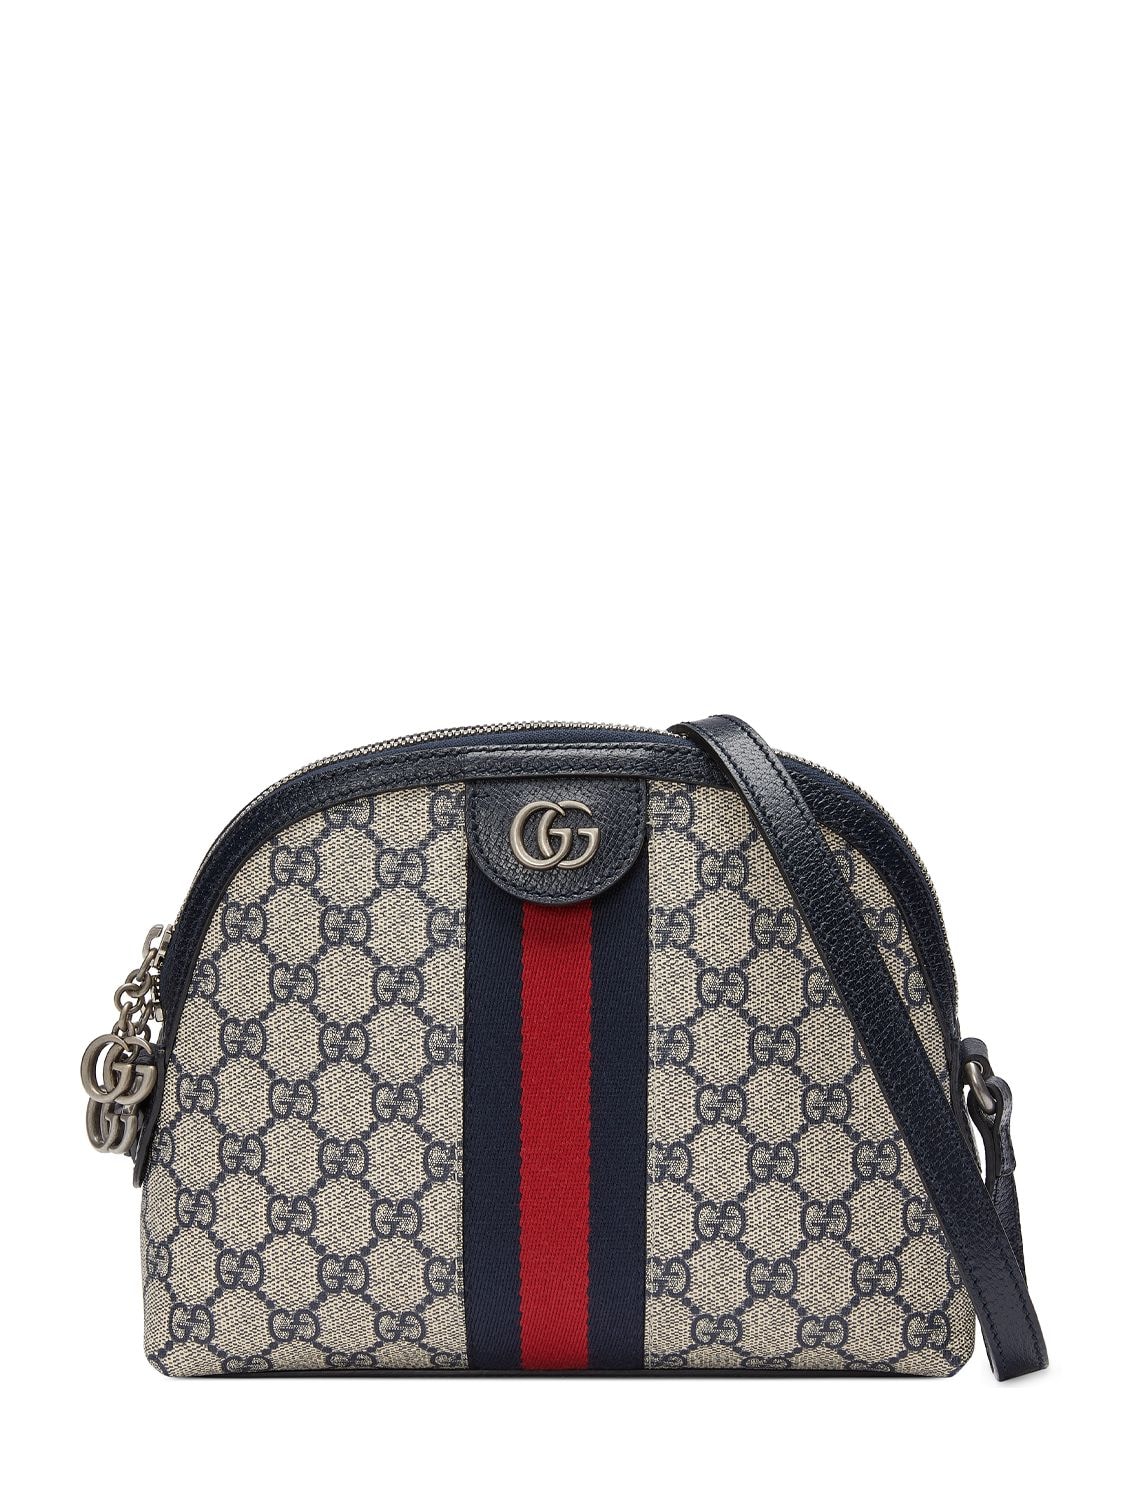 Gucci Ophidia Gg Supreme Shoulder Bag In 블루 베이지